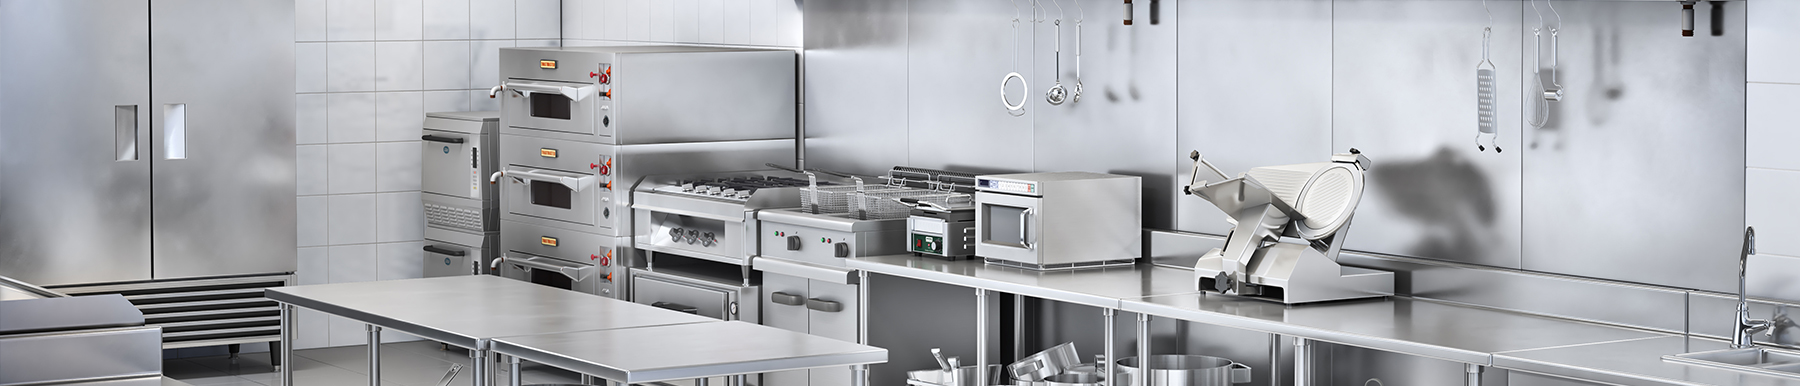 Catering Equipment Suppliers Near Glasgow | H2 Catering Equipment Catering Equipment